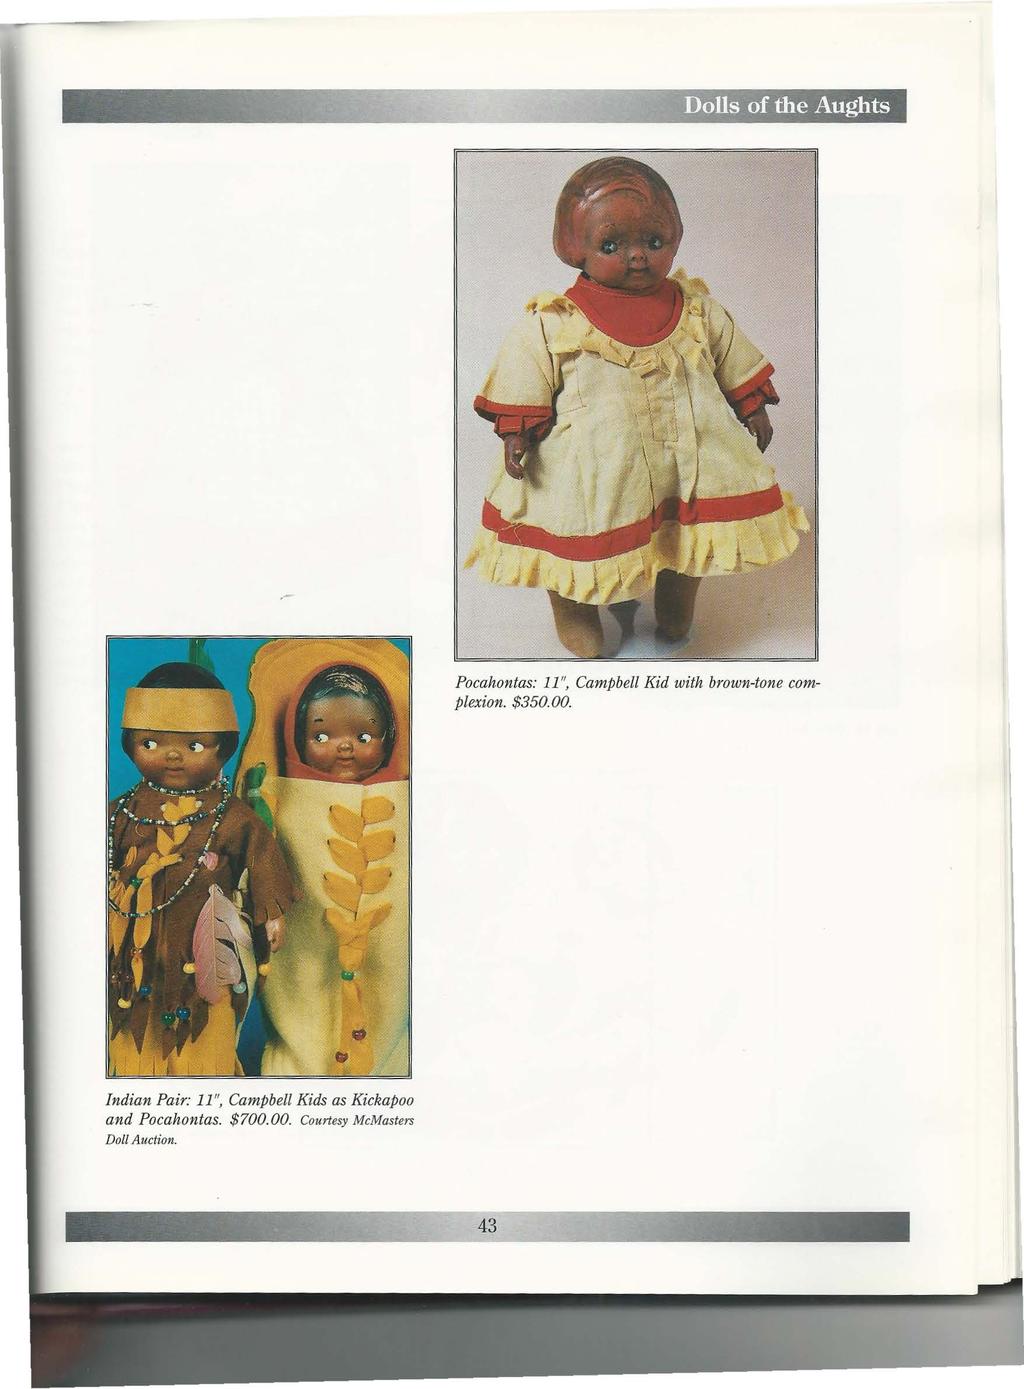 ..: Dolls of the Aughts y._""' ~.- Pocahontas: 11", Campbell Kid with brown-tone complexion. $350.00.